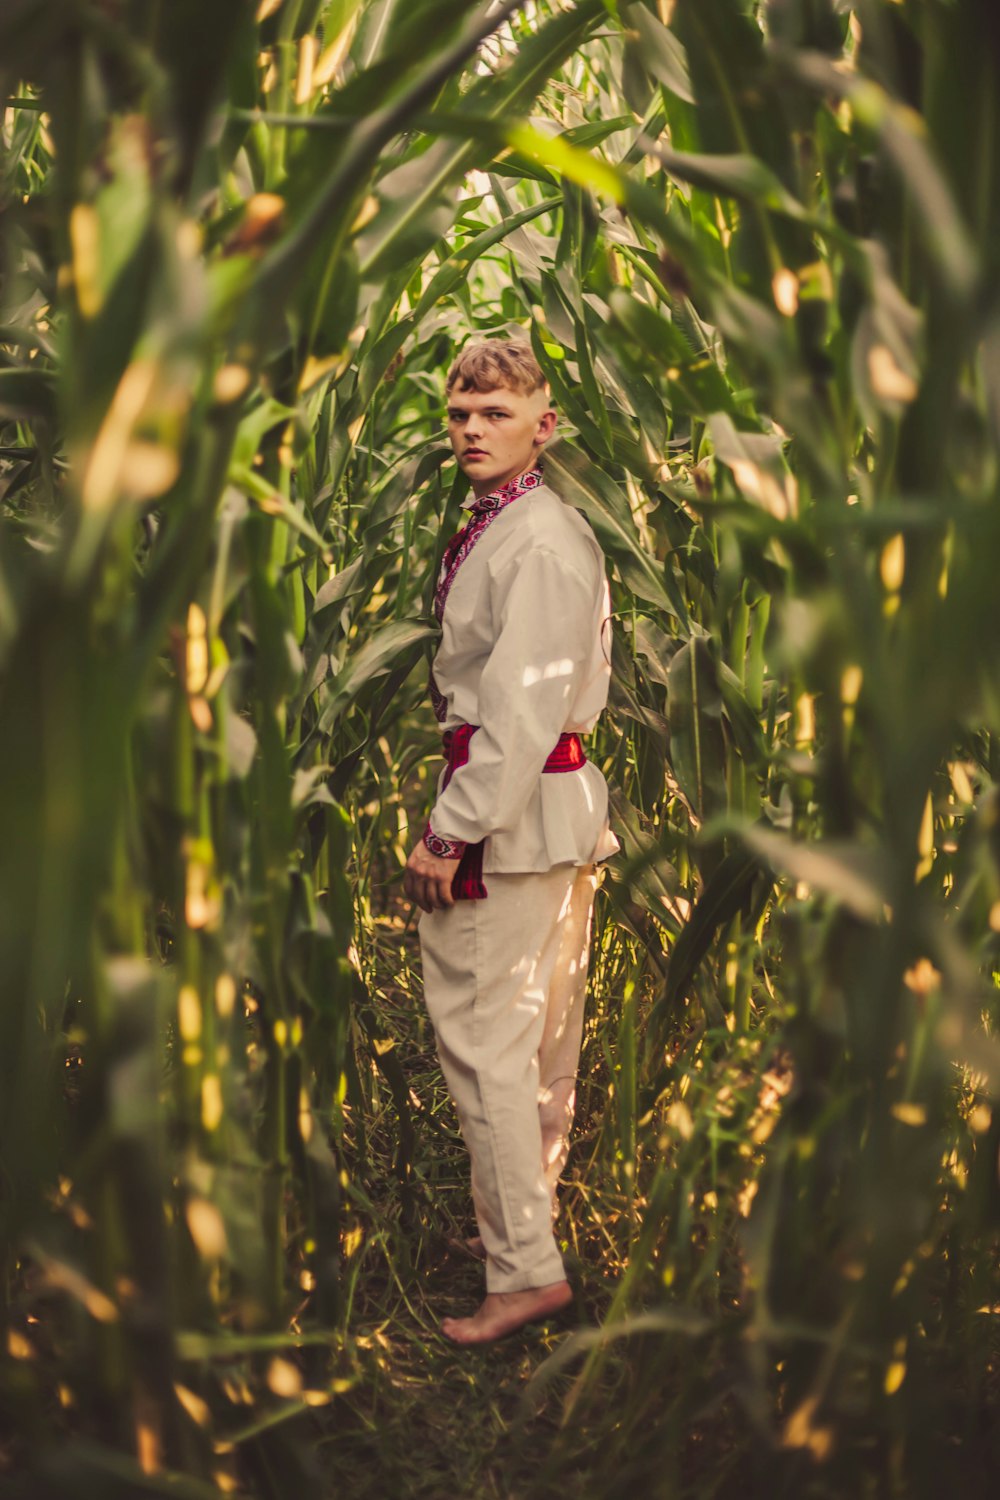 a man in a suit standing in a corn field